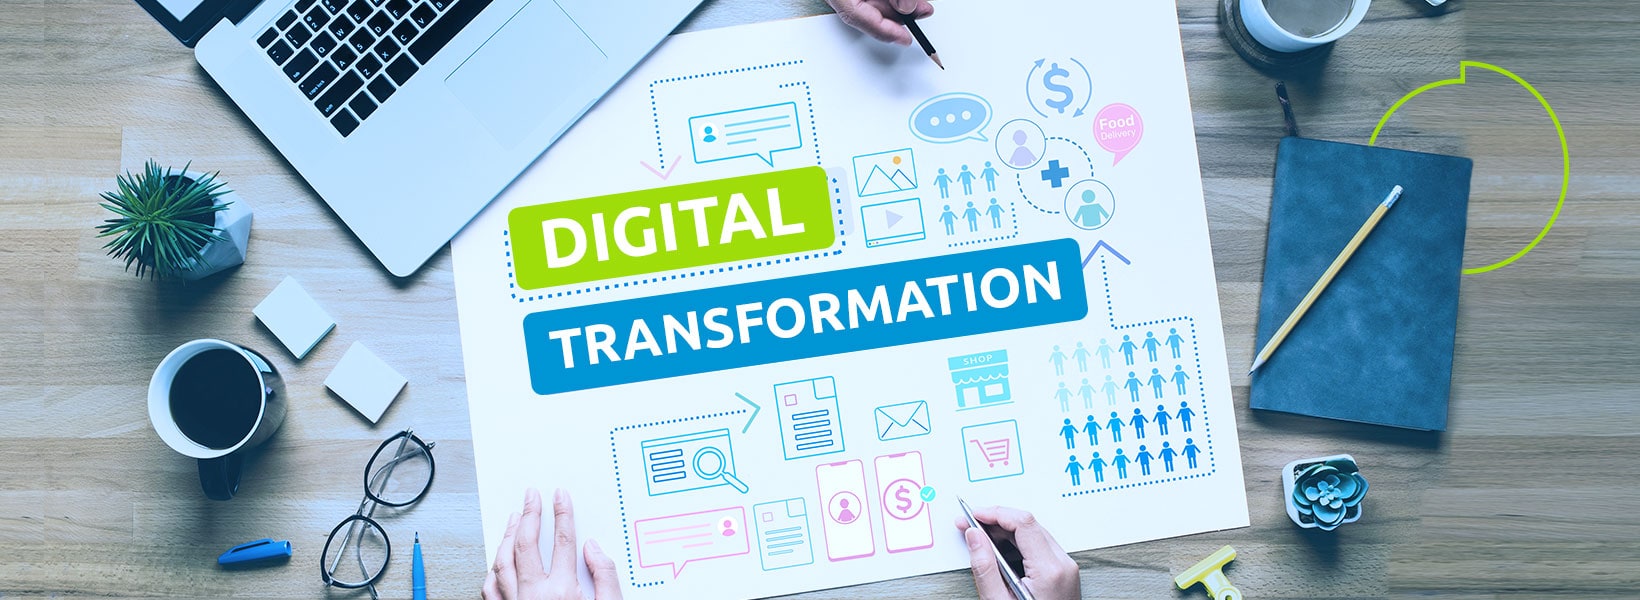 Digital Transformation in Customer Service – Why You Can’t Afford to Ignore it (Part 1 of 4)